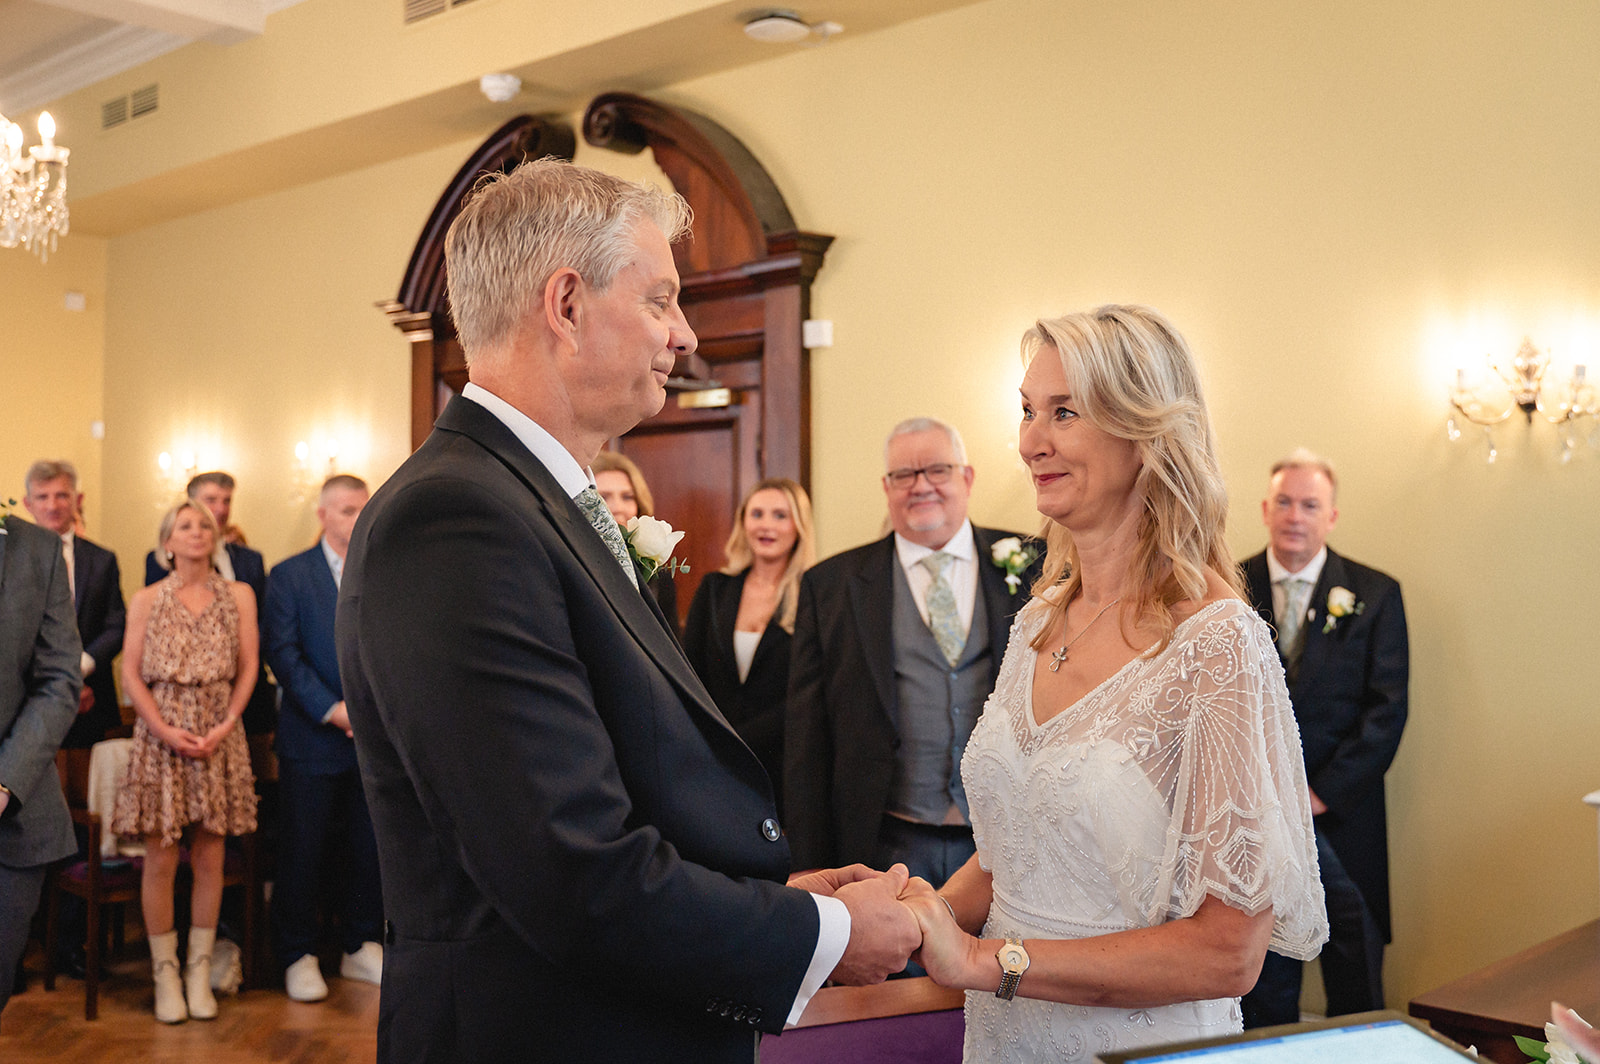 Lindsay and David's exchanging vows during the wedding ceremony in the Brydon Room at Chelsea Town Hall